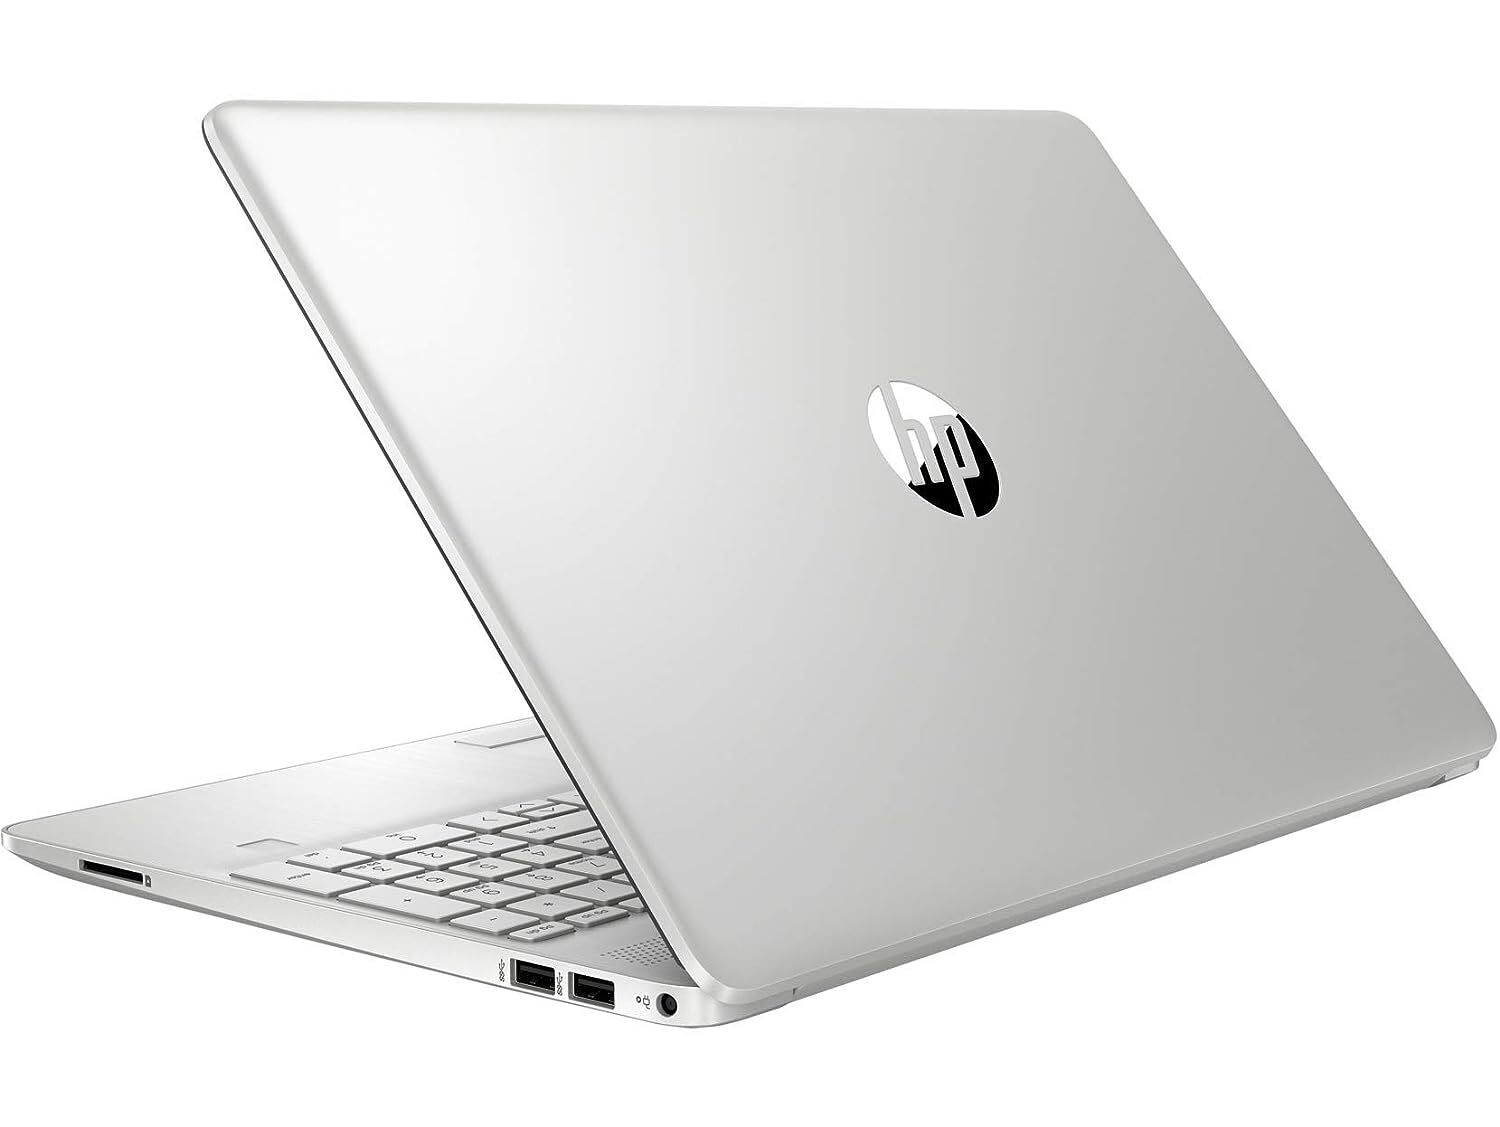 HP 15 Thin & Light 11th Gen Intel Core i5-1135G7 15.6 inches FHD Laptop, 8GB DDR4, 1TB HDD, Windows 10 Home, MS Office, Integrated Graphics, FPR 15 (Natural Silver, 1.76 Kg), 15s-du3032TU